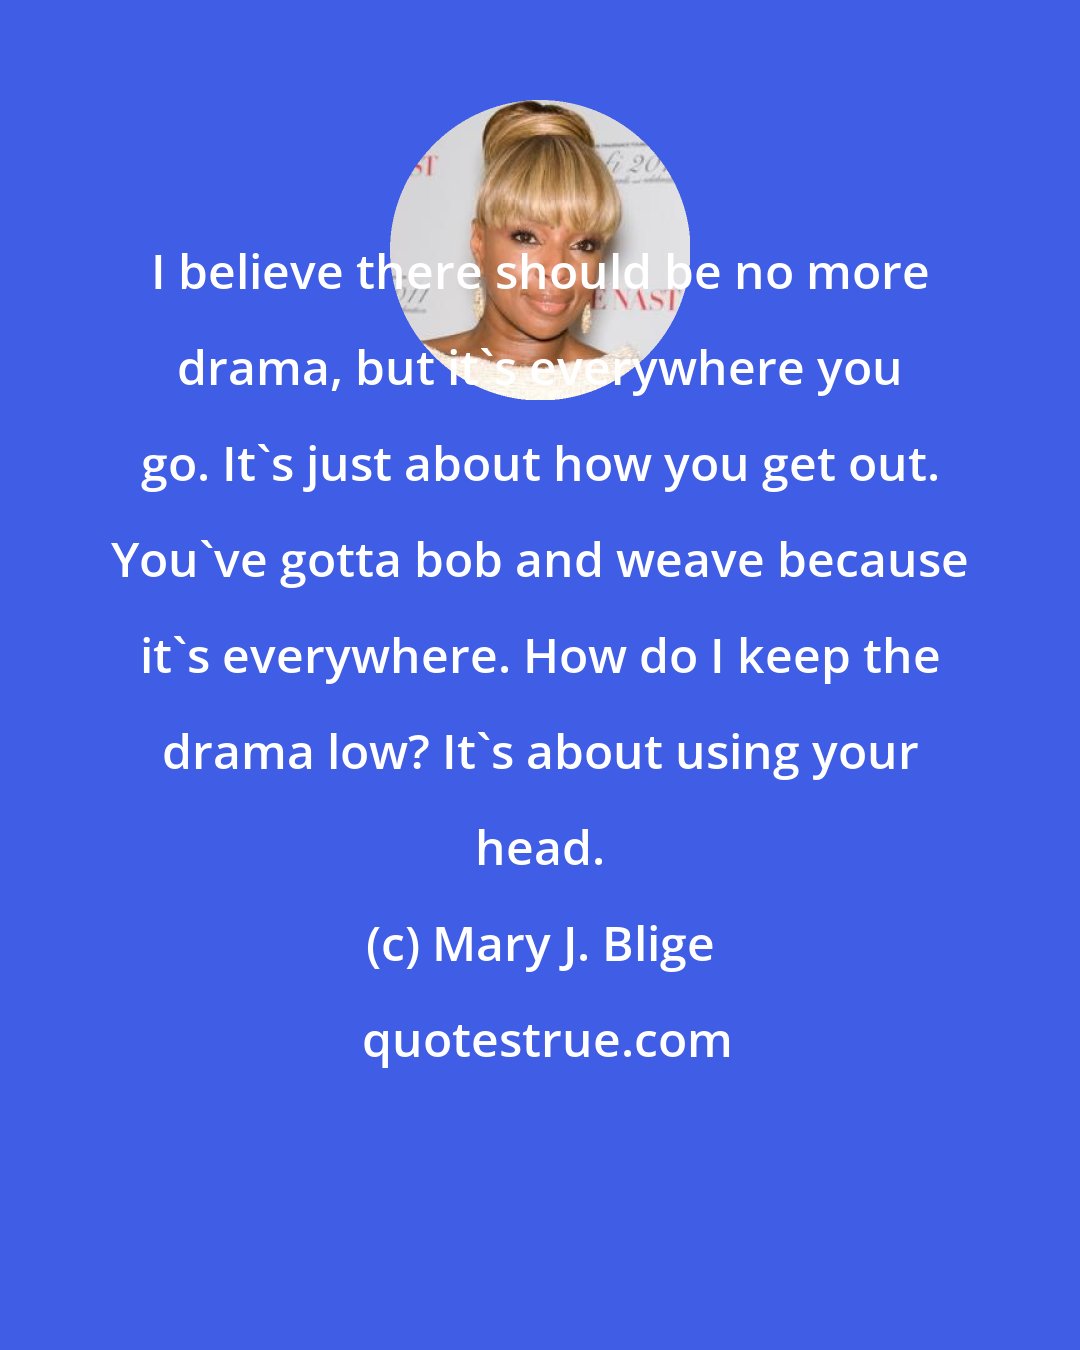 Mary J. Blige: I believe there should be no more drama, but it's everywhere you go. It's just about how you get out. You've gotta bob and weave because it's everywhere. How do I keep the drama low? It's about using your head.